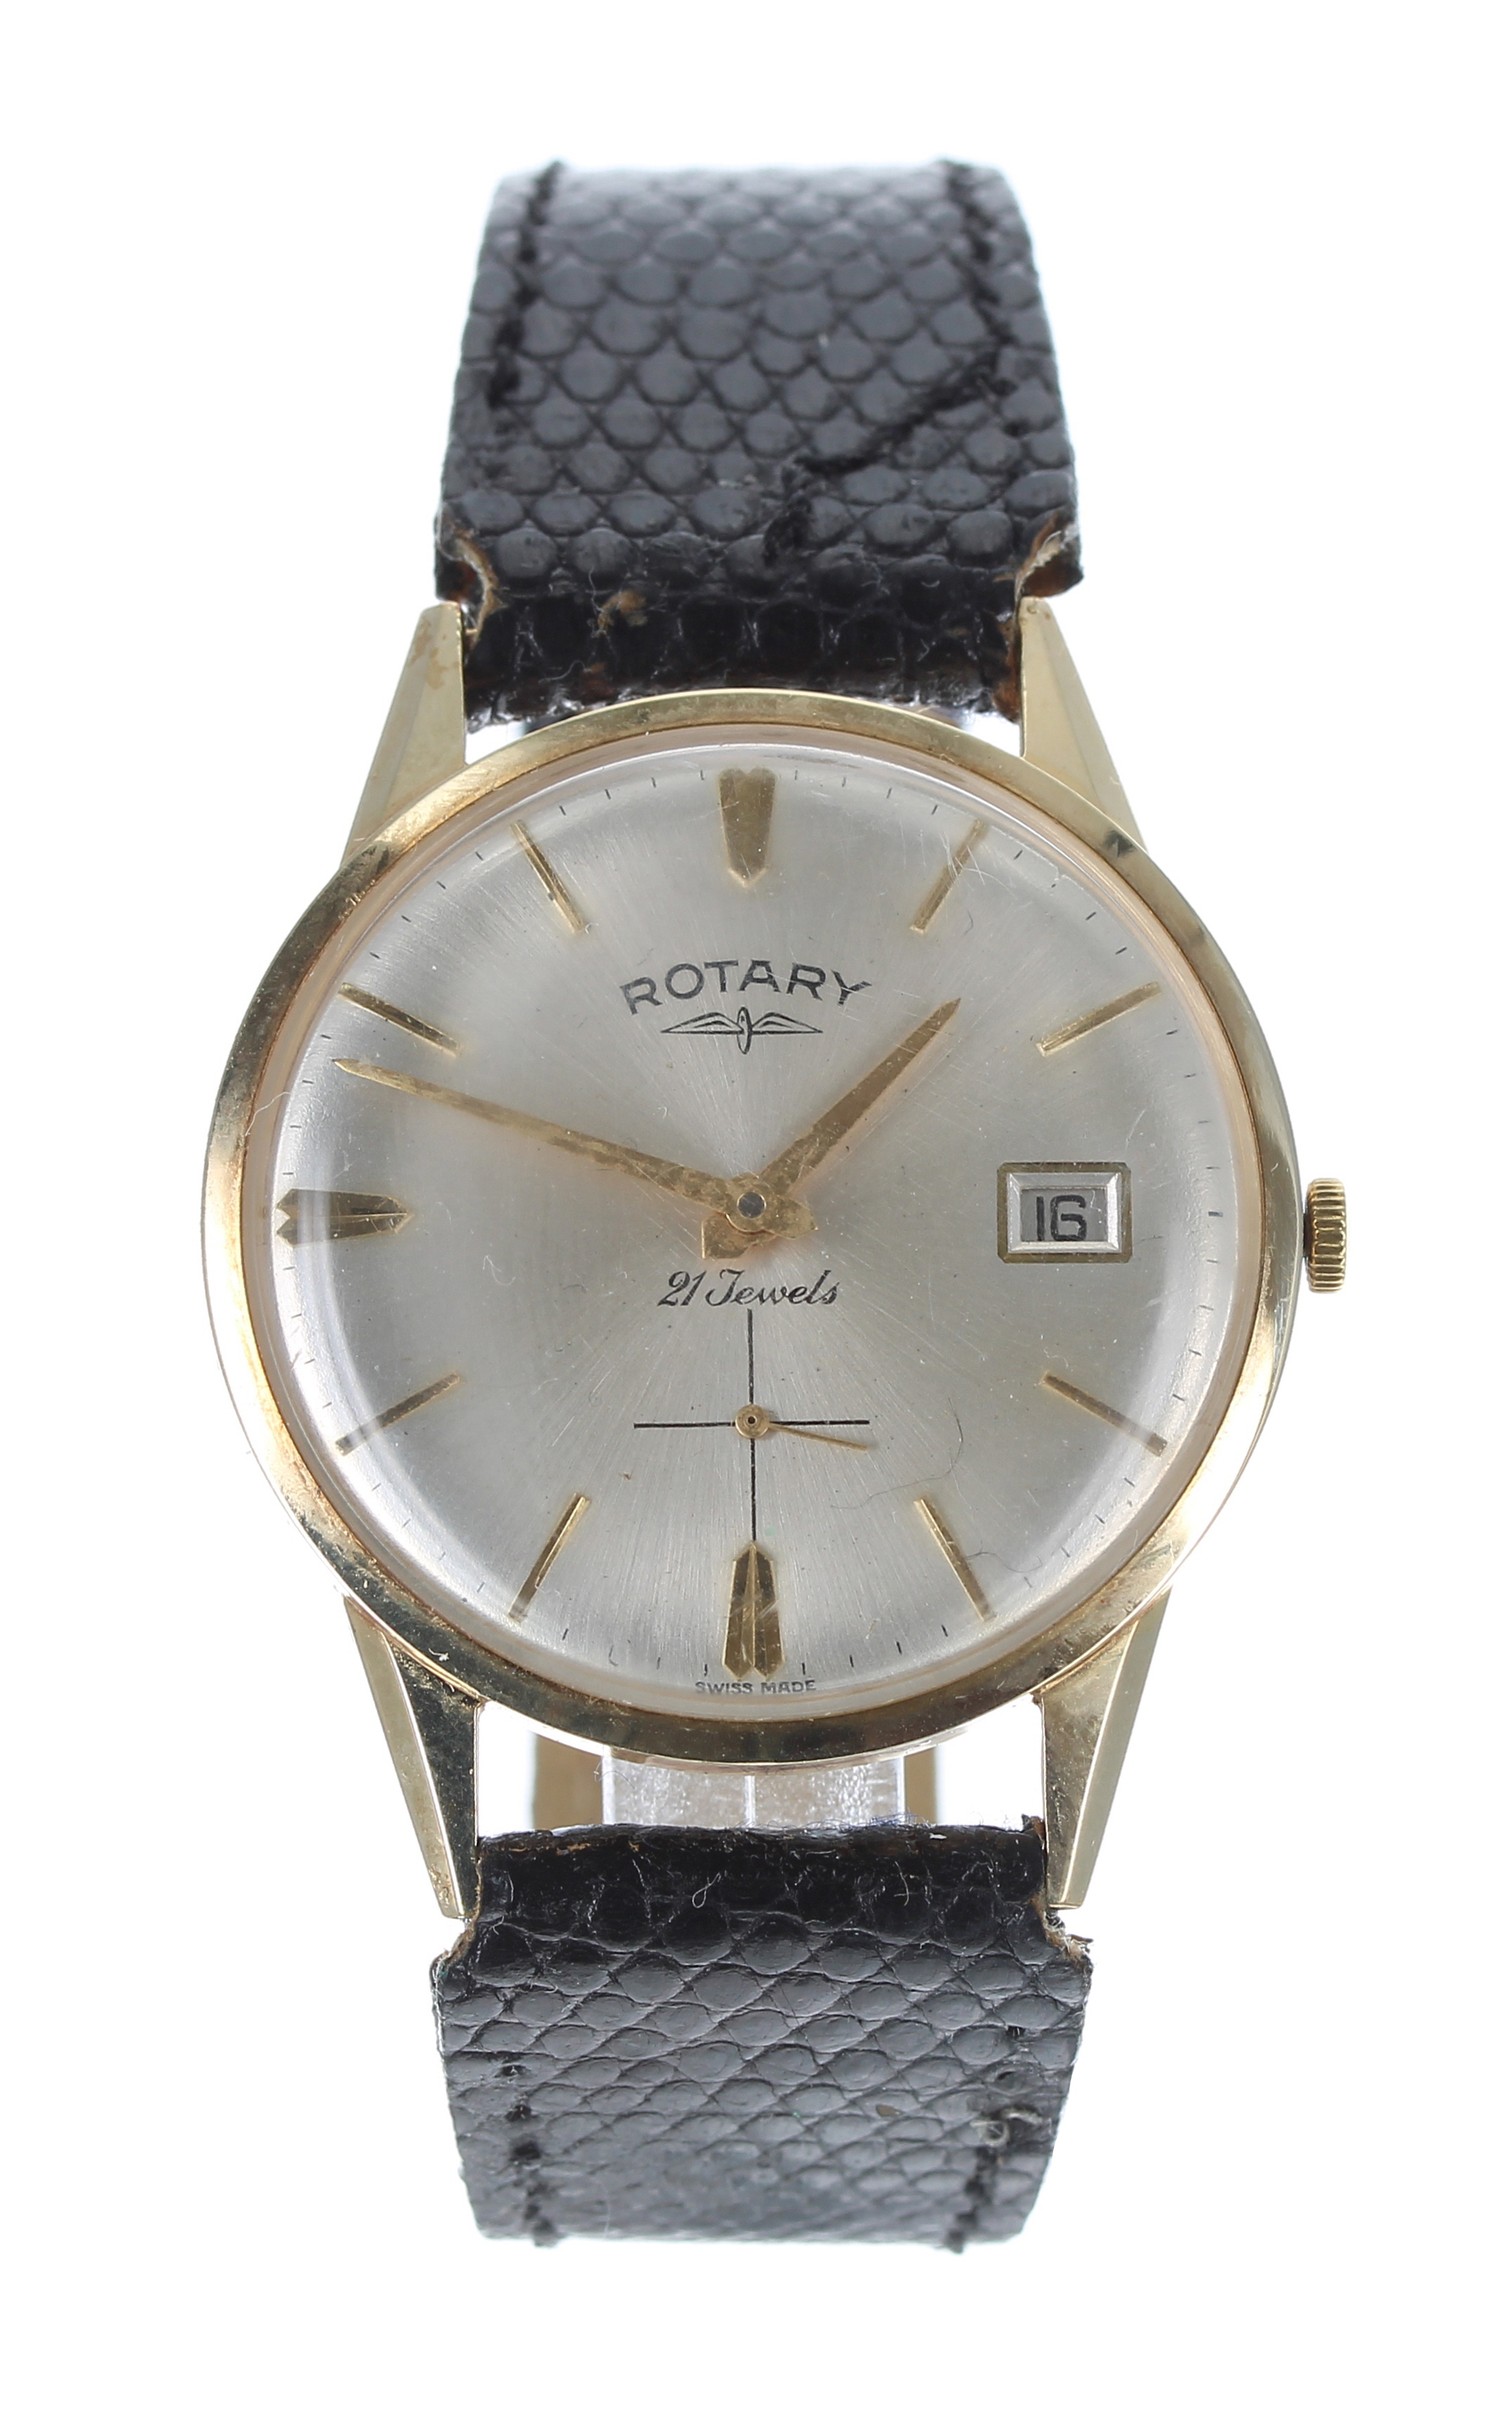 Rotary 9ct automatic gentleman's wristwatch, silvered dial with baton markers, date aperture and